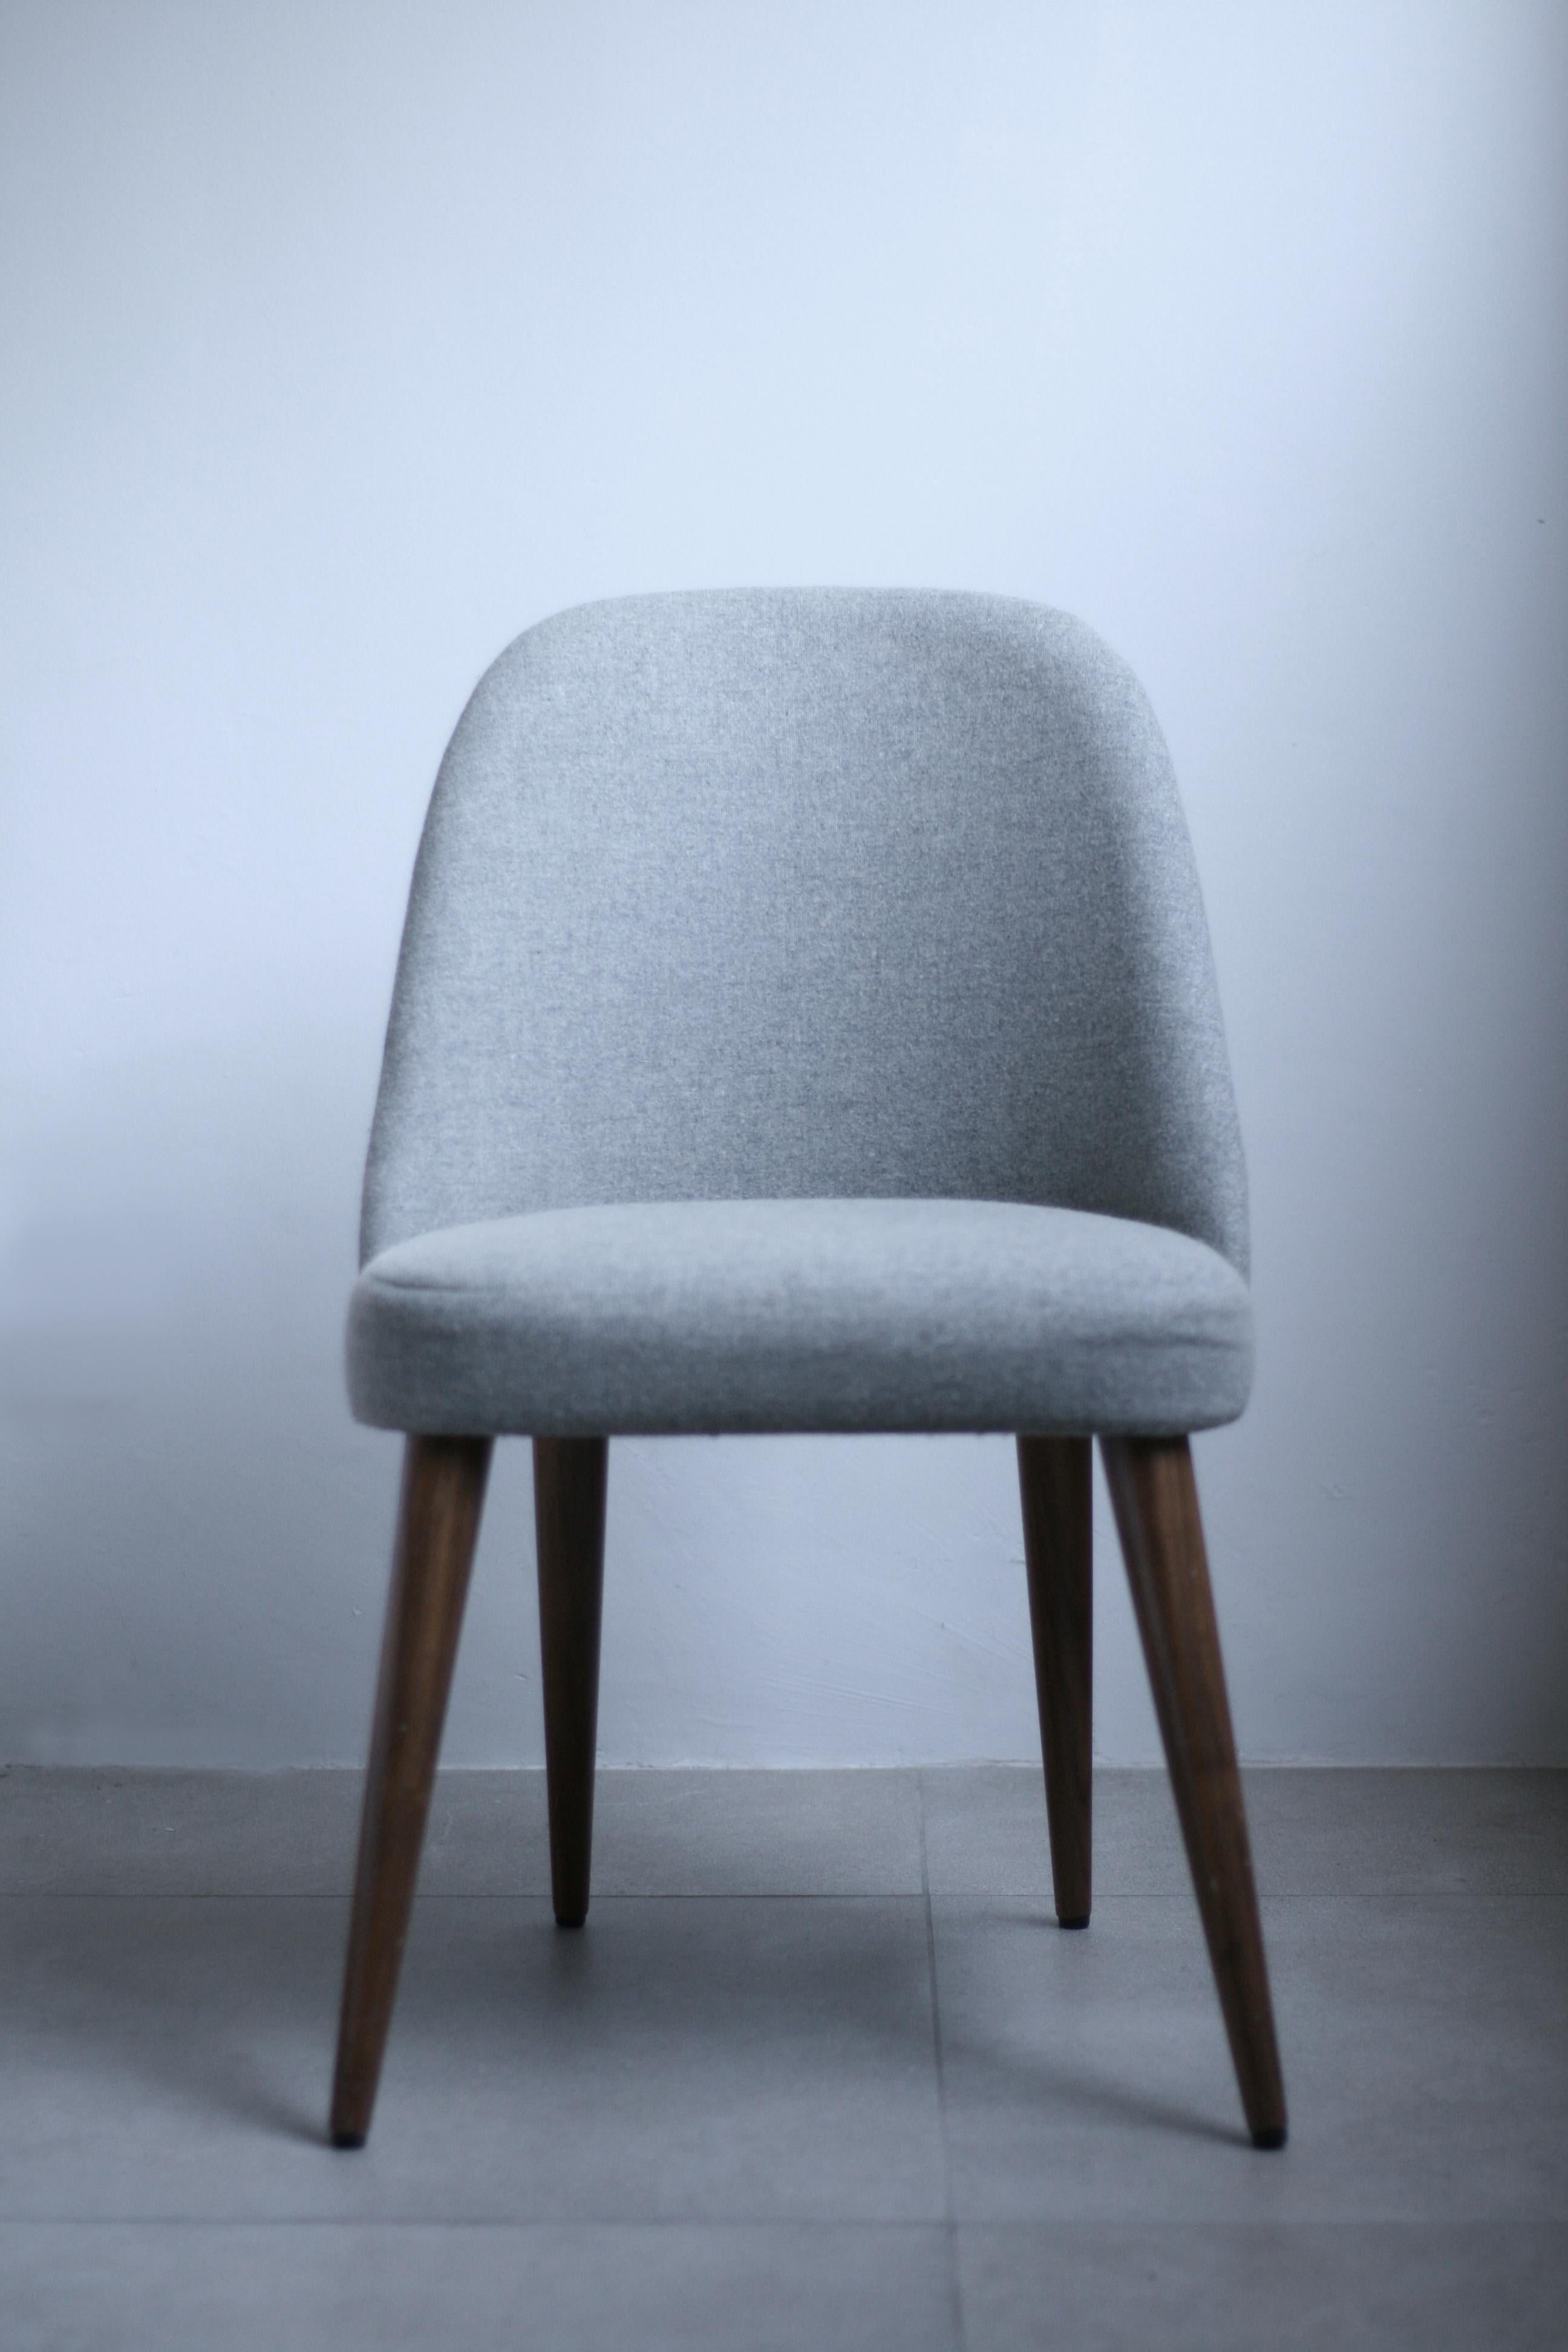 Helsinki collection. Helsinki desk chair: simple, elegant, comfortable. Available in oak and walnut base or in custom materials, may be upholstered with variety of fabrics and colors. Also available as an arm chair and stool. 

Our clients´ favorite